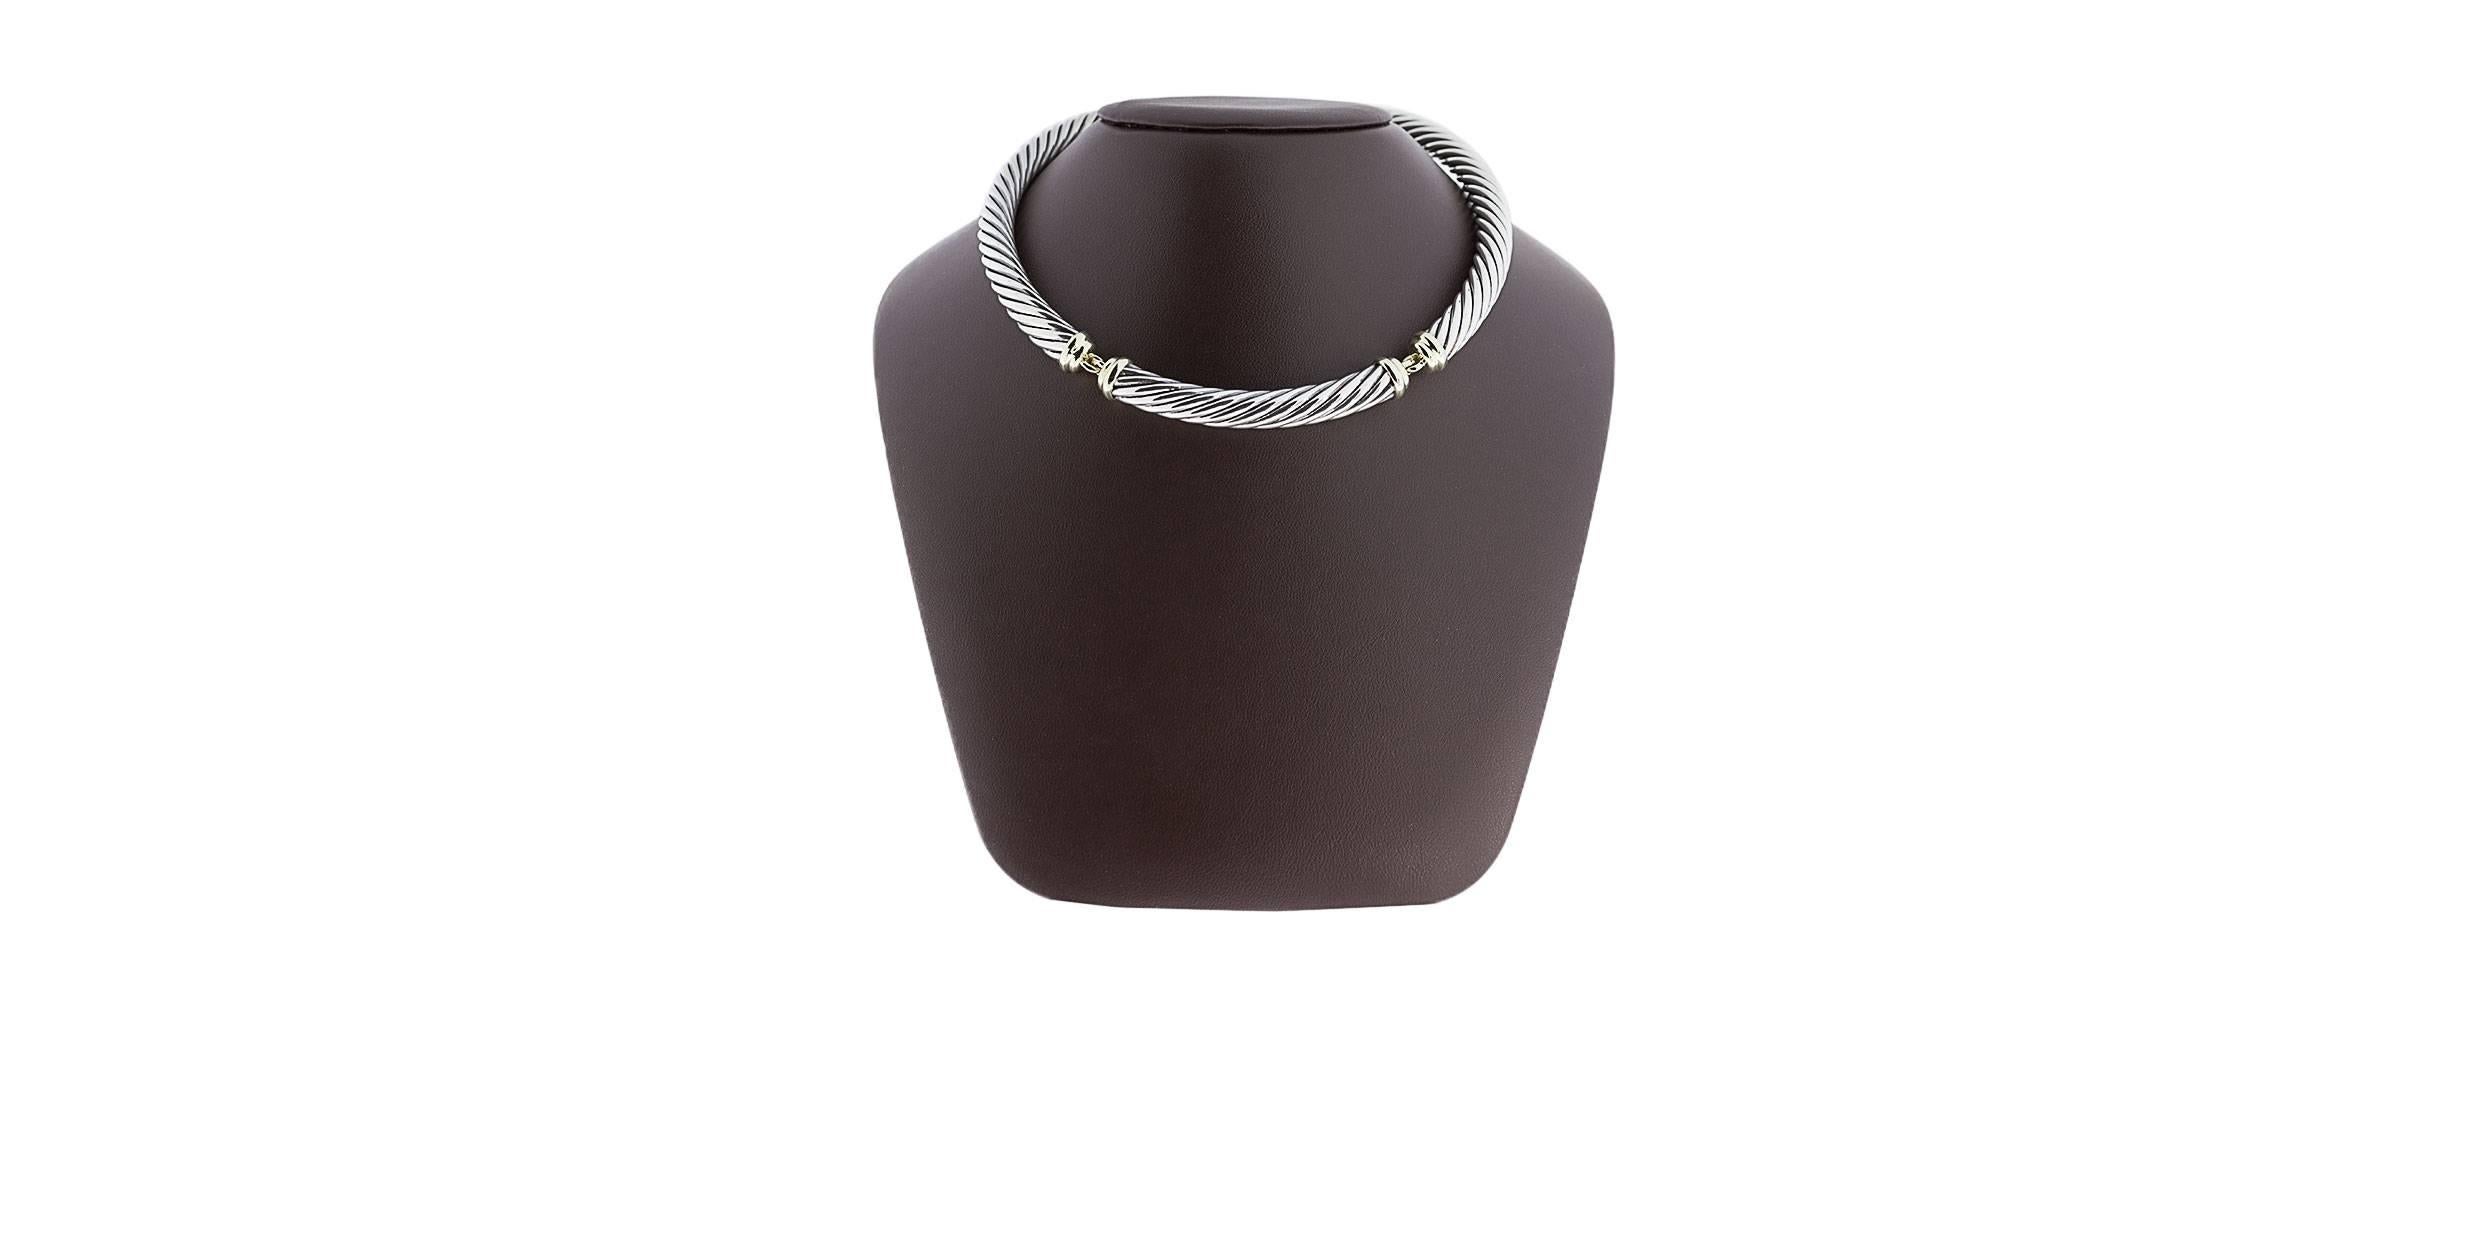 David Yurman's cable style jewelry has become his signature, the unifying element of every collection. This classic necklace features Yurman's iconic cable design in 3 sections of sterling silver cable. These sections are linked together & accented